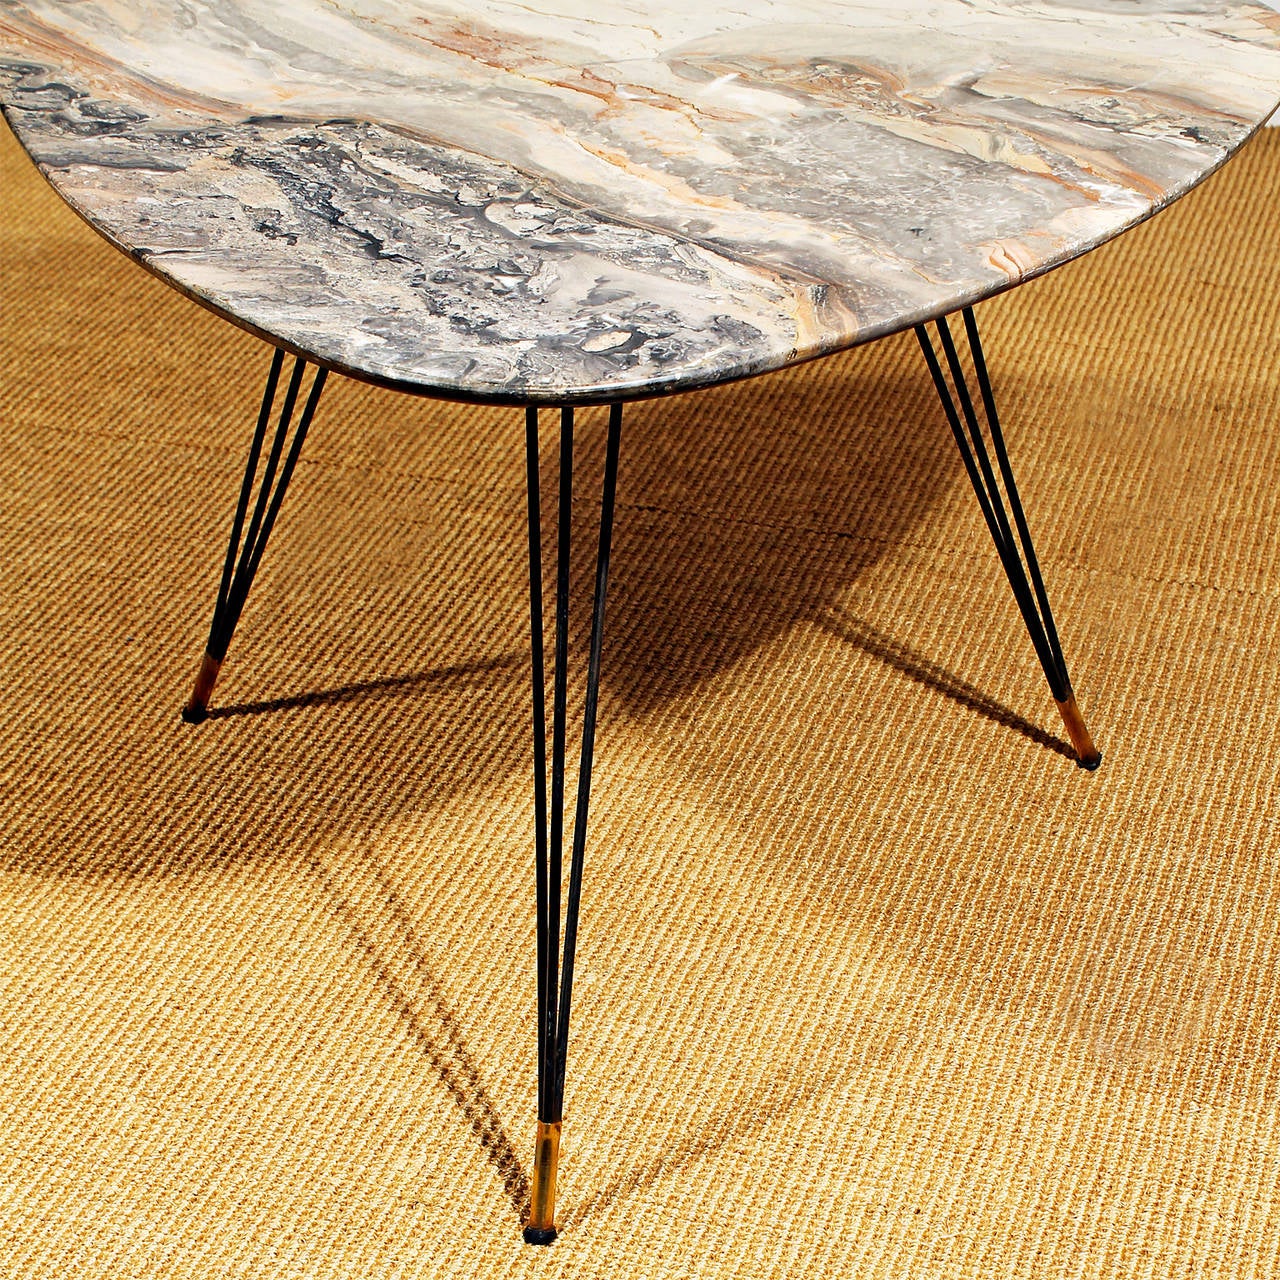 Mid-20th Century Italian tripod coffee table from the 1950s